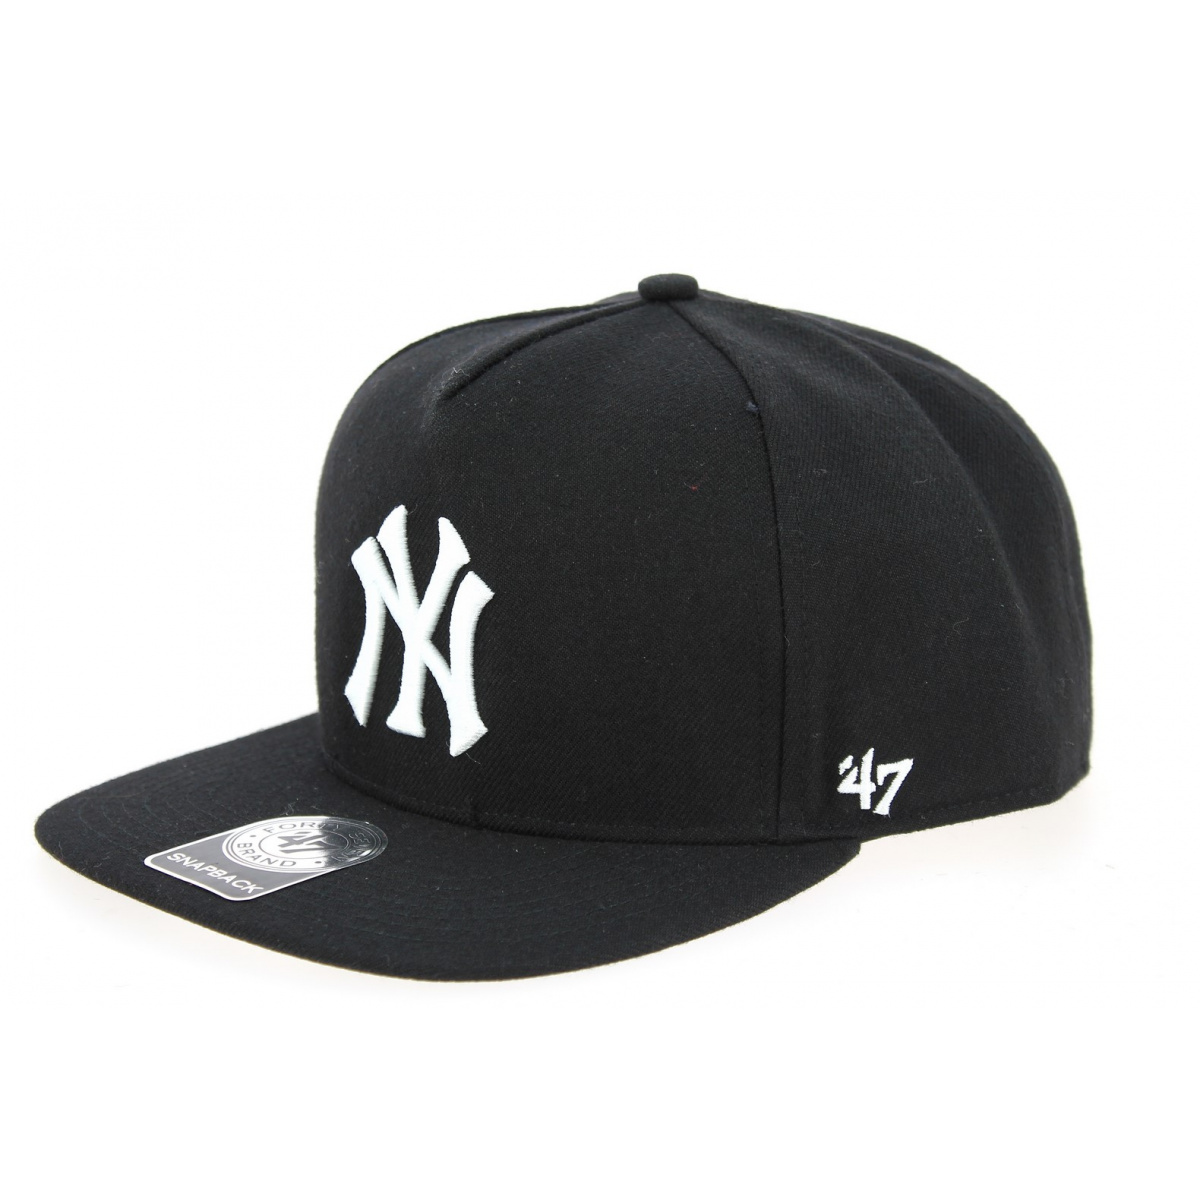 Casquette NY Yankees Noire- 47 Brand Reference : 5614